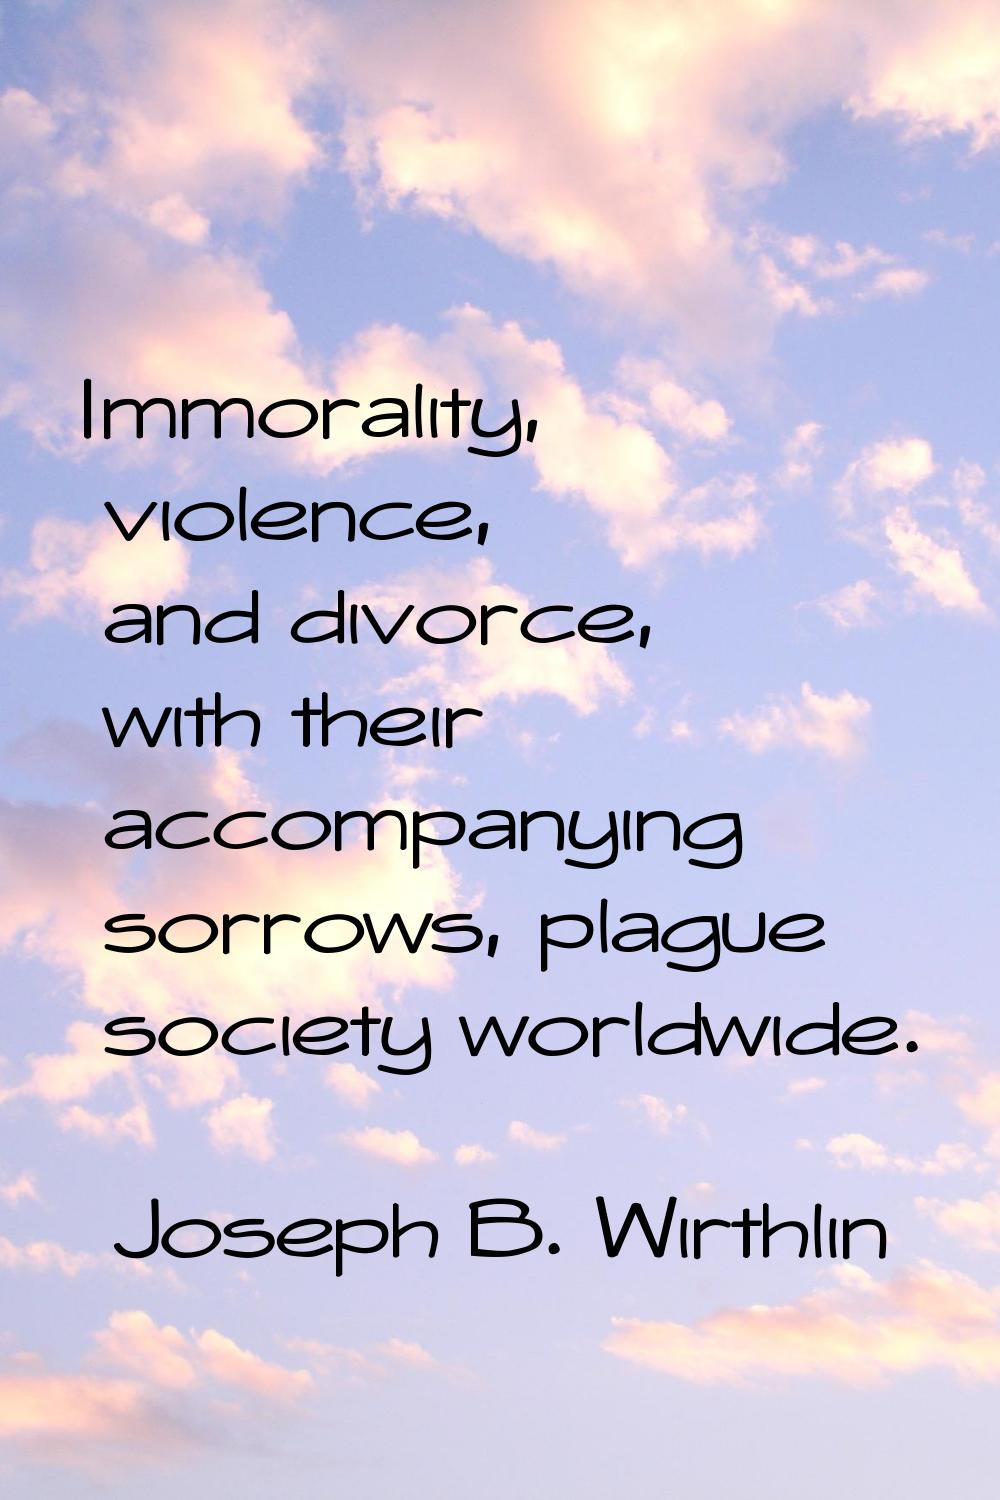 Immorality, violence, and divorce, with their accompanying sorrows, plague society worldwide.